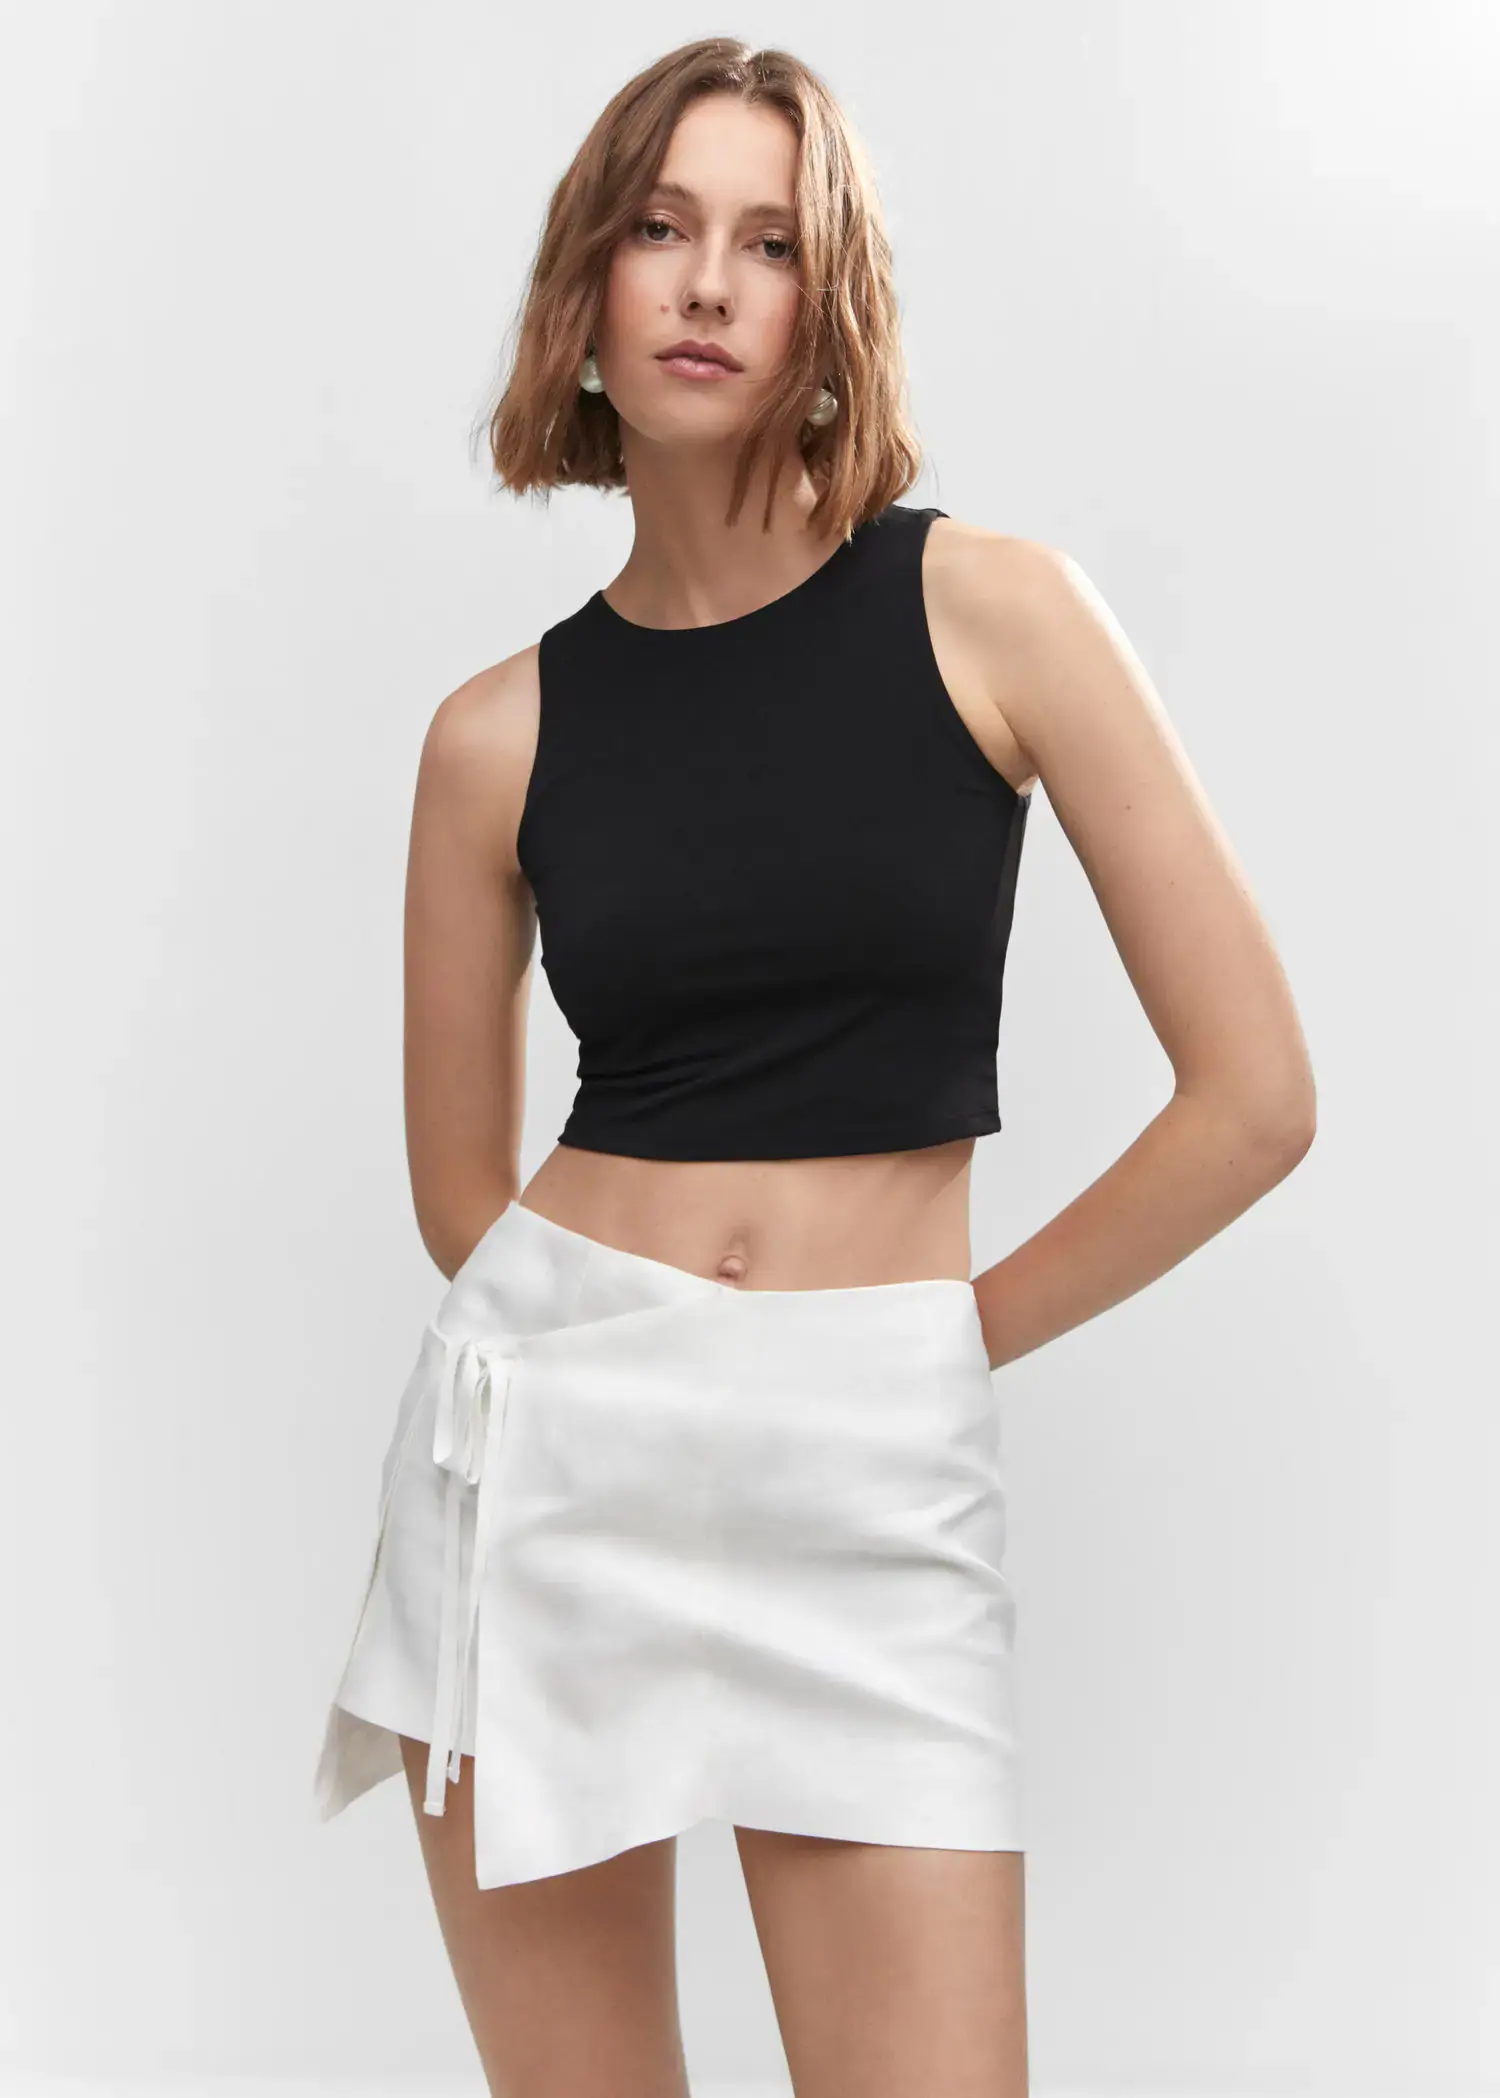 Mango Crop top with halter neck. a woman wearing a black crop top and a white skirt. 